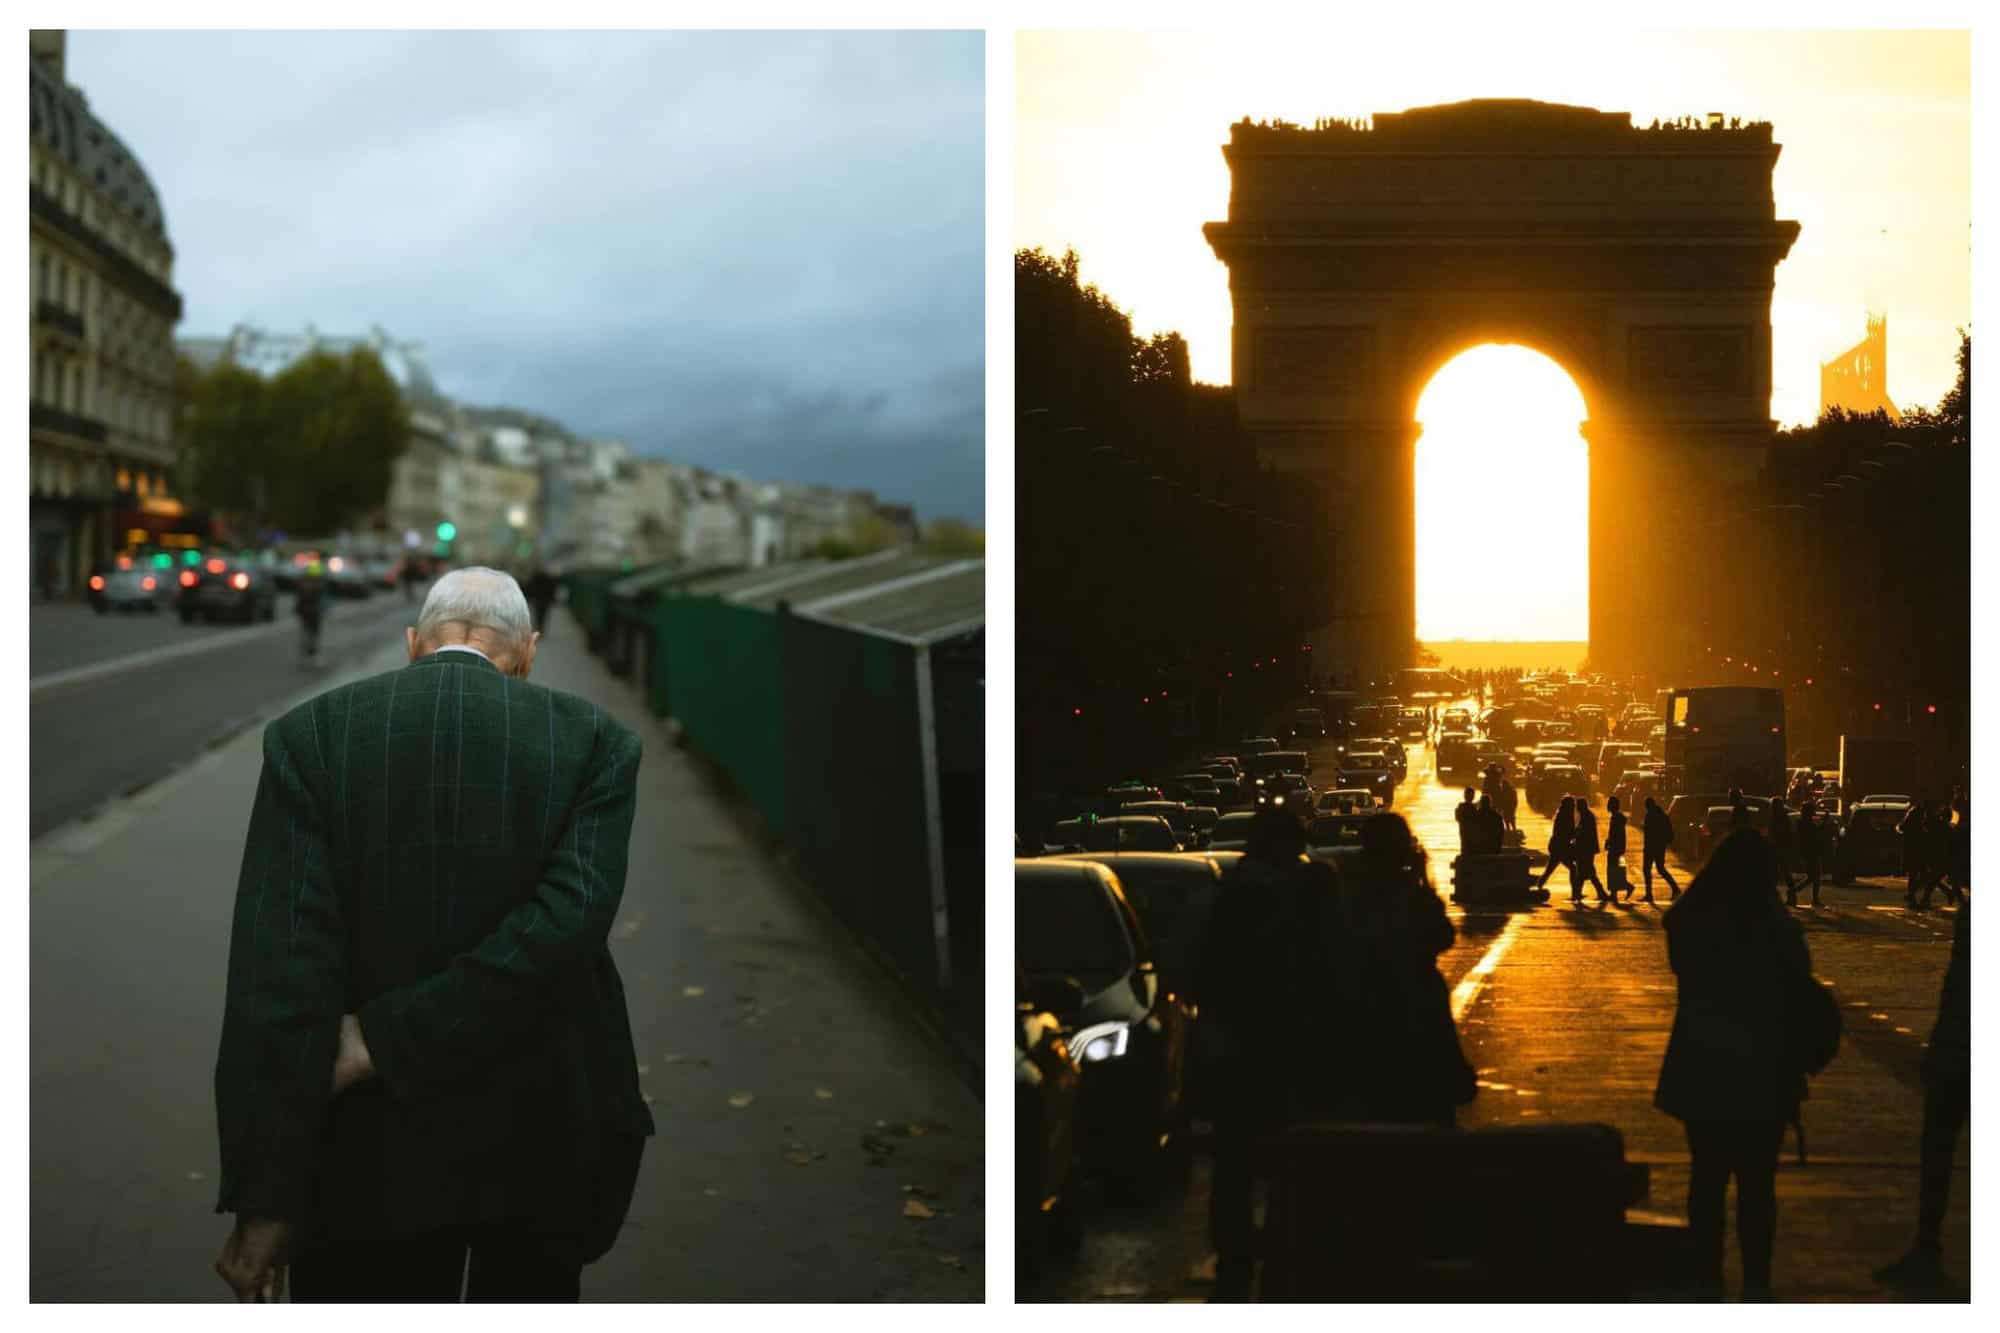 Left: a man walking down a street in Paris next to the Seine river. He has his arms clasped behind his back and his frontside isn't visible. Several book shops that line the Seine are visible to the right. There are cars' lights visible to the left. Right: the Arc du Triomphe in the evening. The sun is shining through the arc and there are cars and people walking visible. The sun is shining so bright that it makes most of the picture orange while the buildings, people, and cars are black.